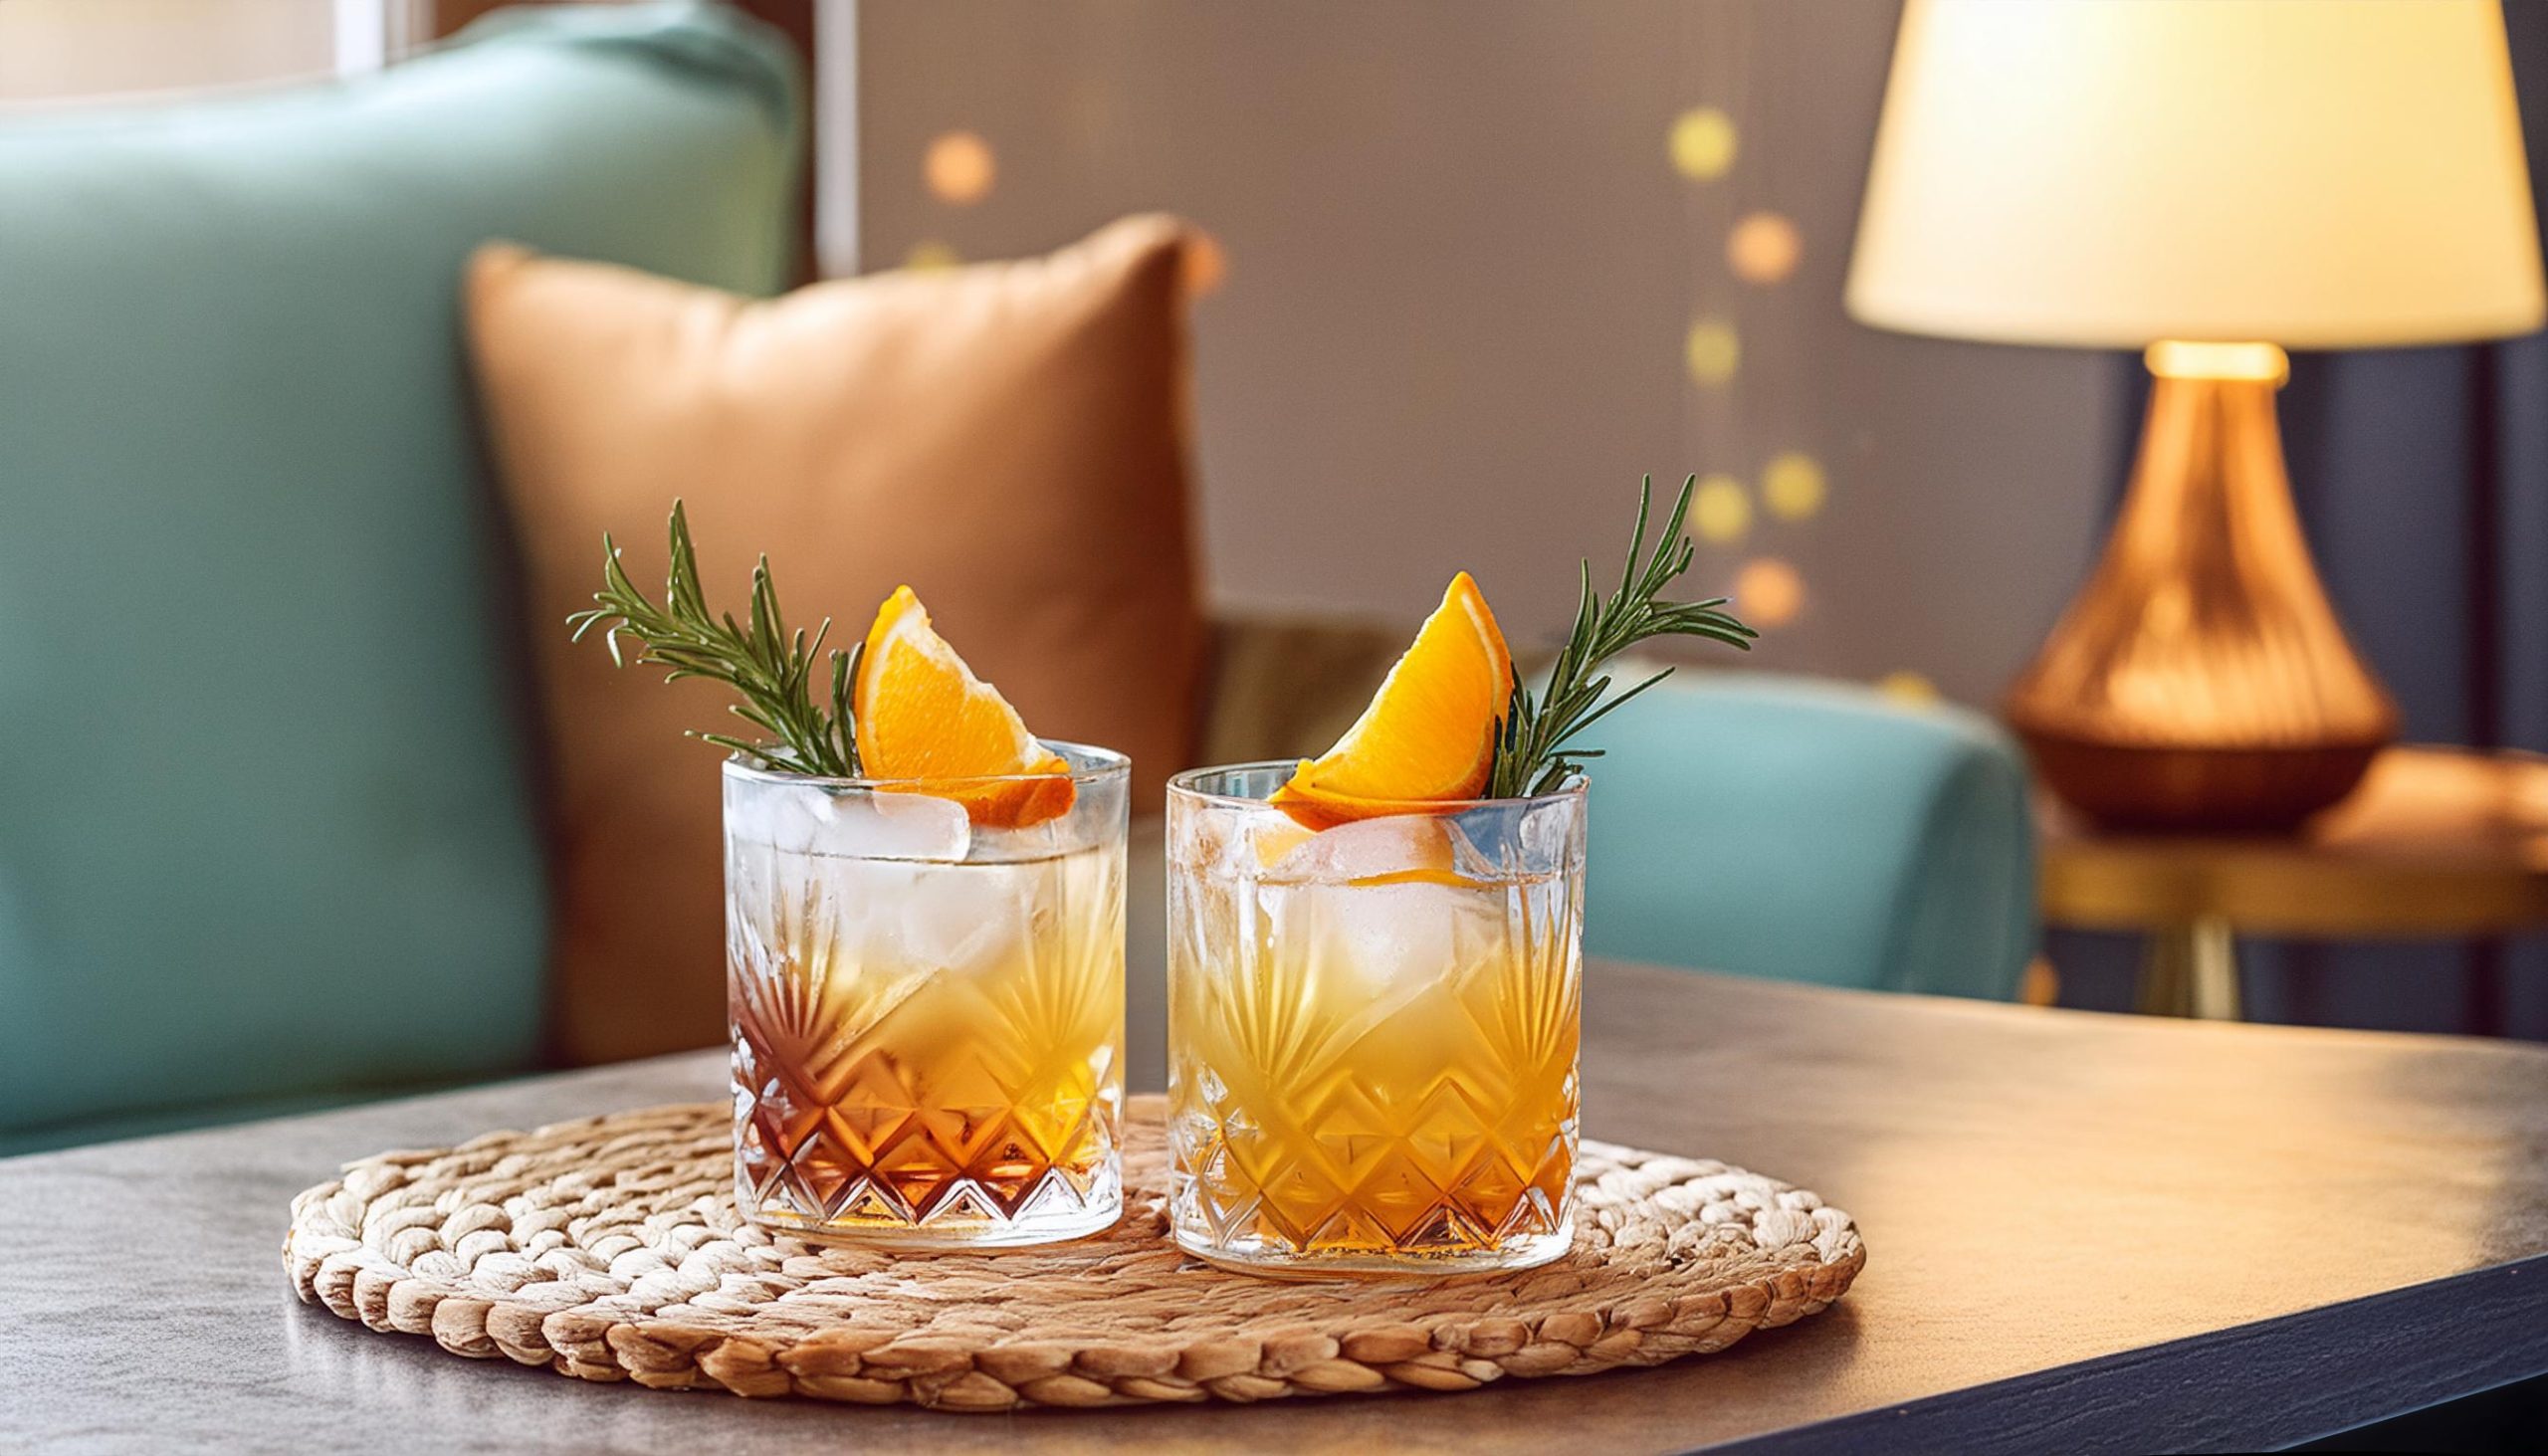 Two Reposado Tequila Old Fashioned cocktails with orange and rosemary garnish, served in a lounge setting